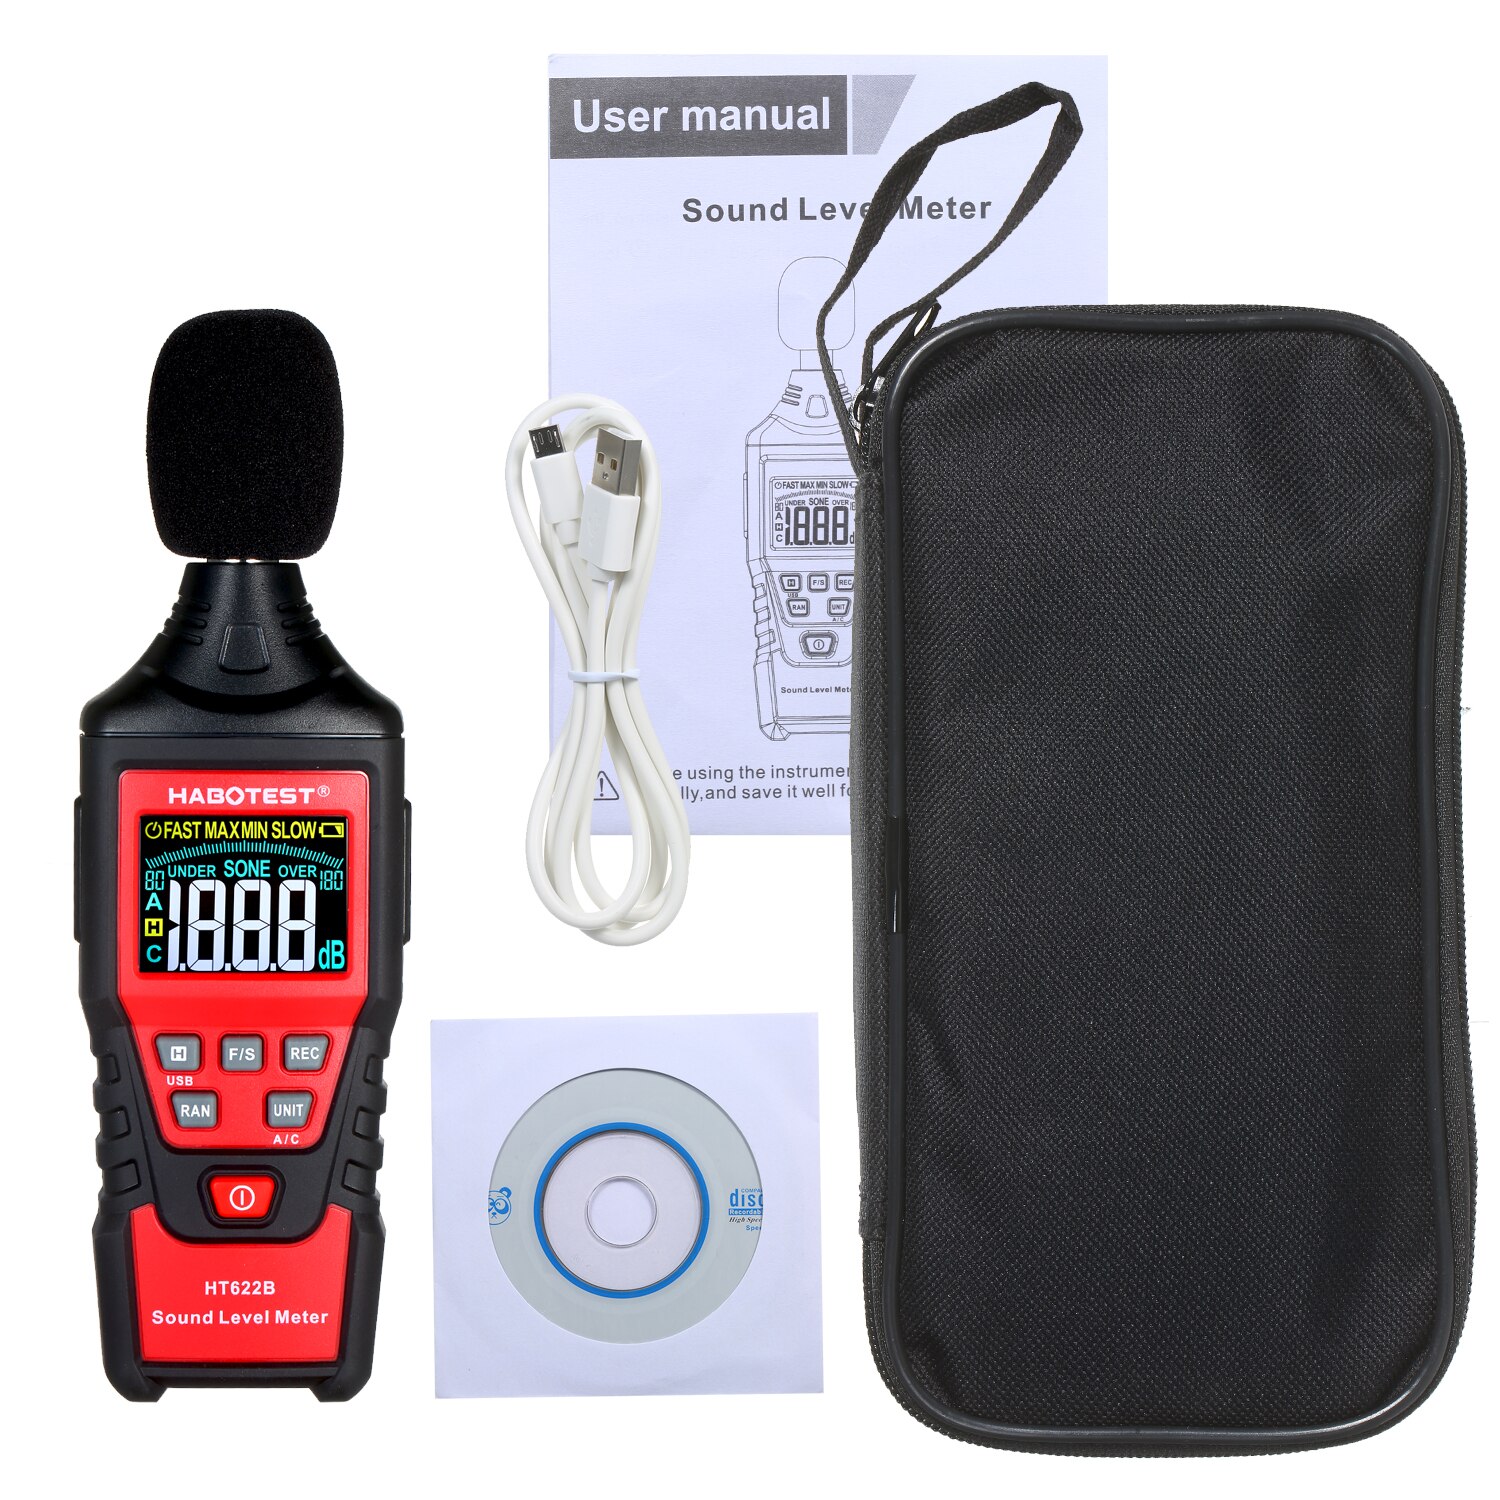 HT622B Digital Decibel Meter with USB Port A/C Weighted Sound Level Meter LCD Color Screen Noise Sound Detector